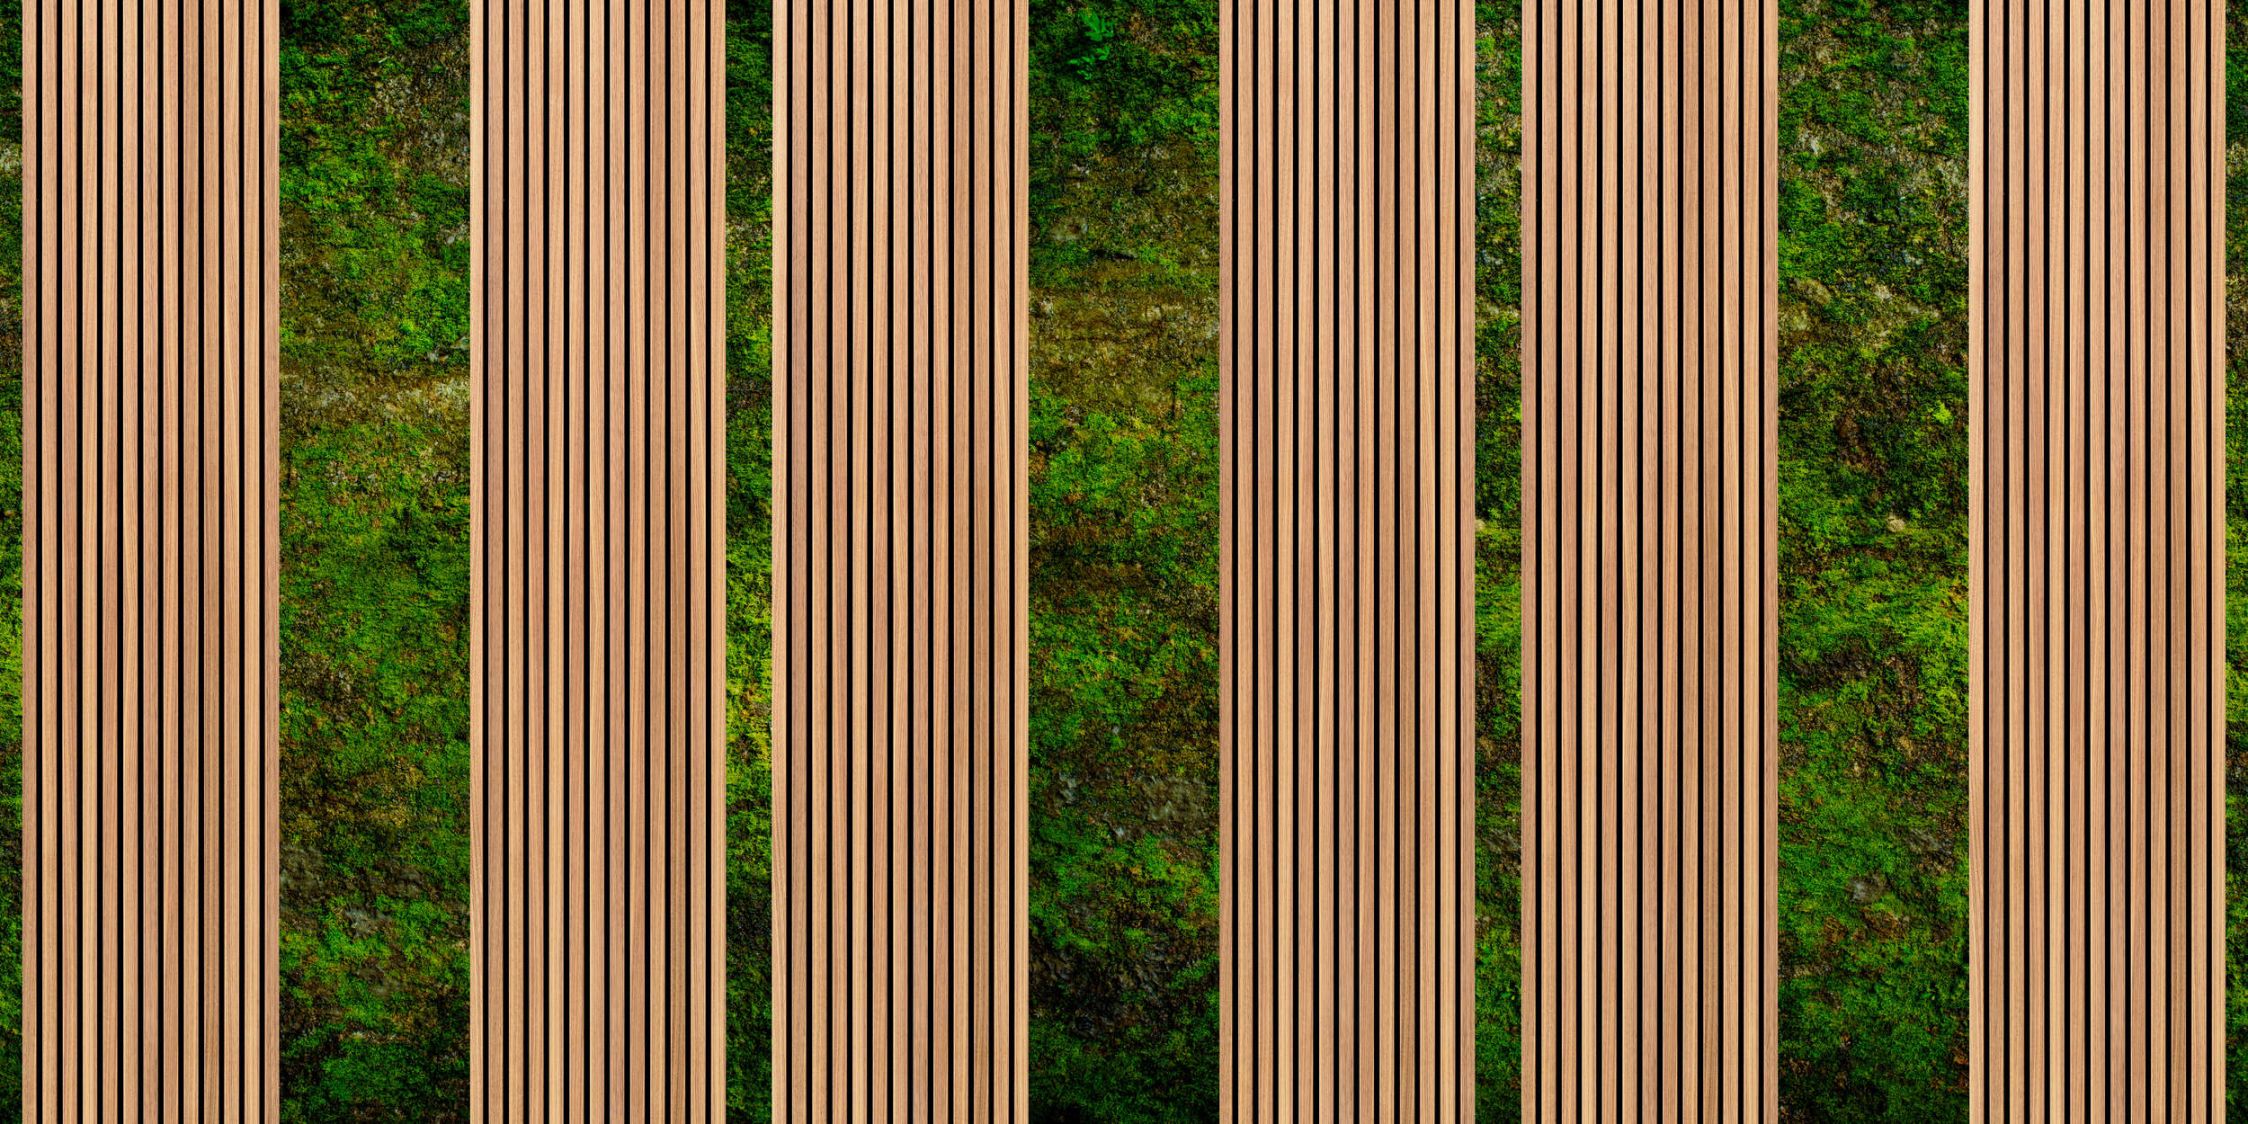             Photo wallpaper »panel 1« - Narrow wood panels & moss - Smooth, slightly pearlescent non-woven fabric
        